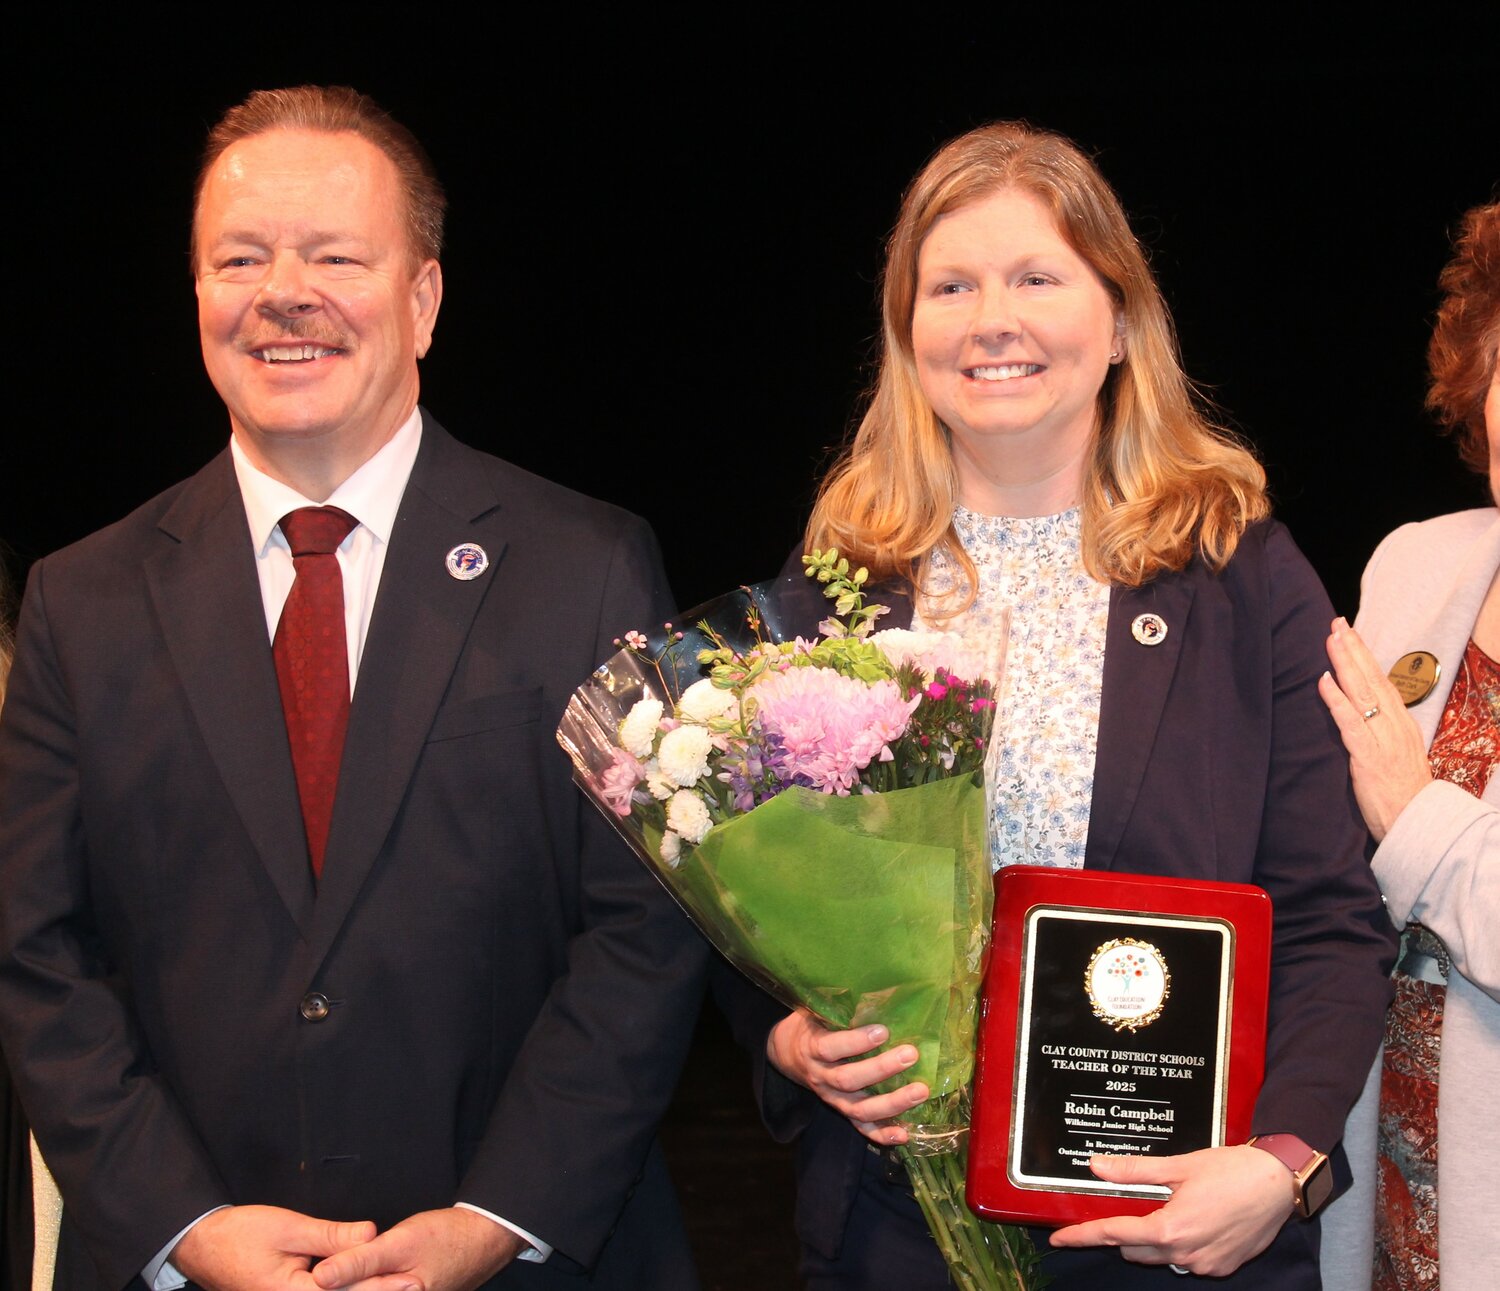 Wilkinson Junior High Science Teacher Robin Campbell won the Teacher of the Year award. Superintendent David Broskie (left) congratulated Campbell for her dedication in and outside the classroom.